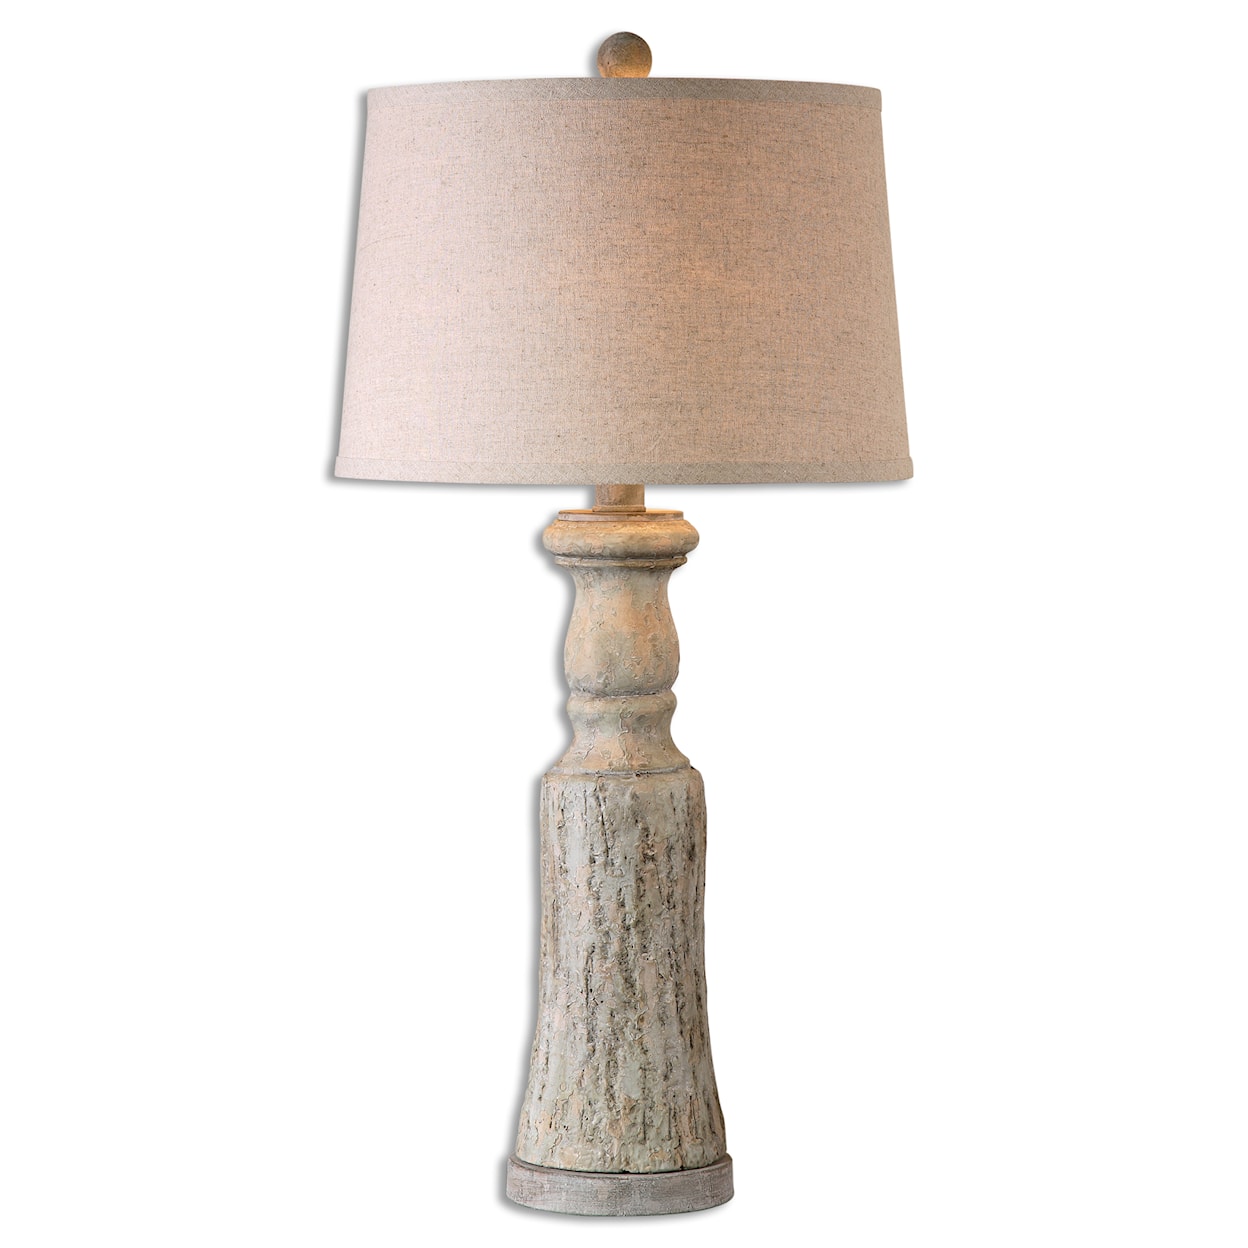 Uttermost Cloverly Cloverly Table Lamp Set Of 2